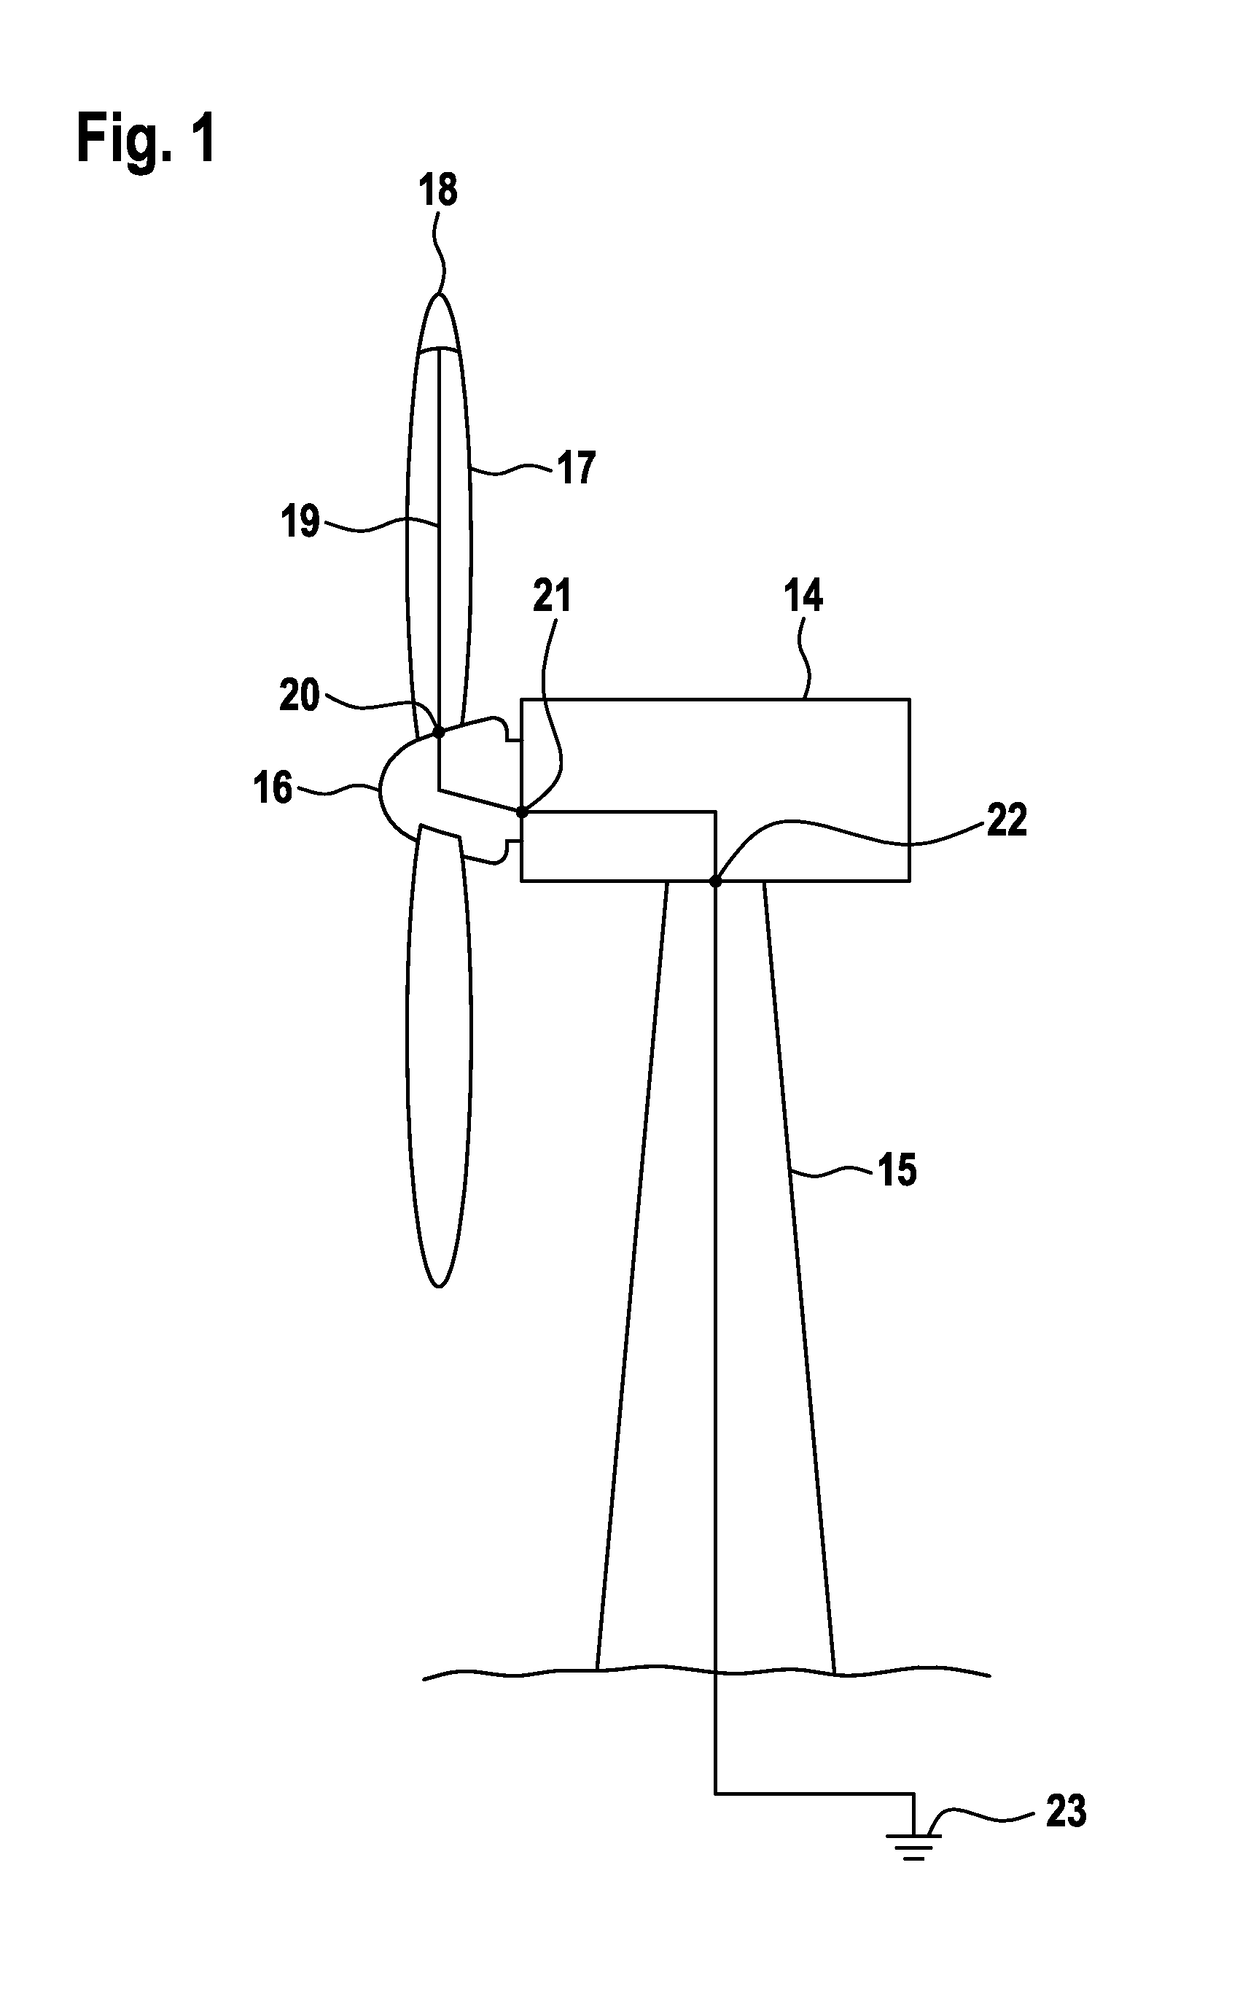 Rotor Blade of a Wind Turbine and Method for Retrofitting a Lightning Protection Device of a Rotor Blade